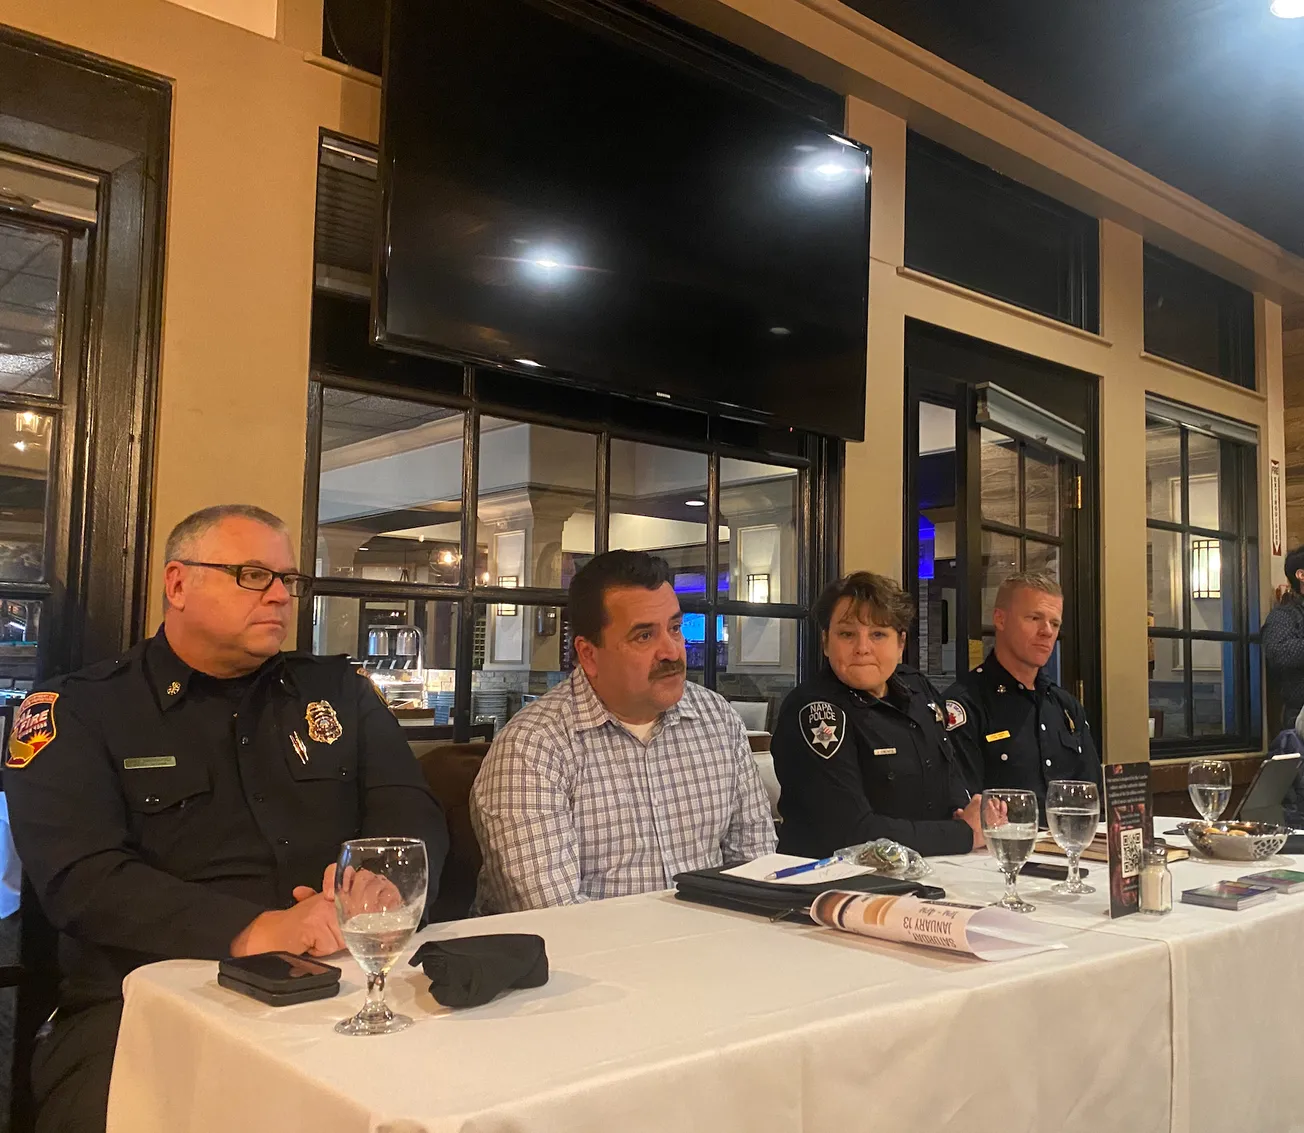 Napa County Latino leaders discuss public safety, mental health